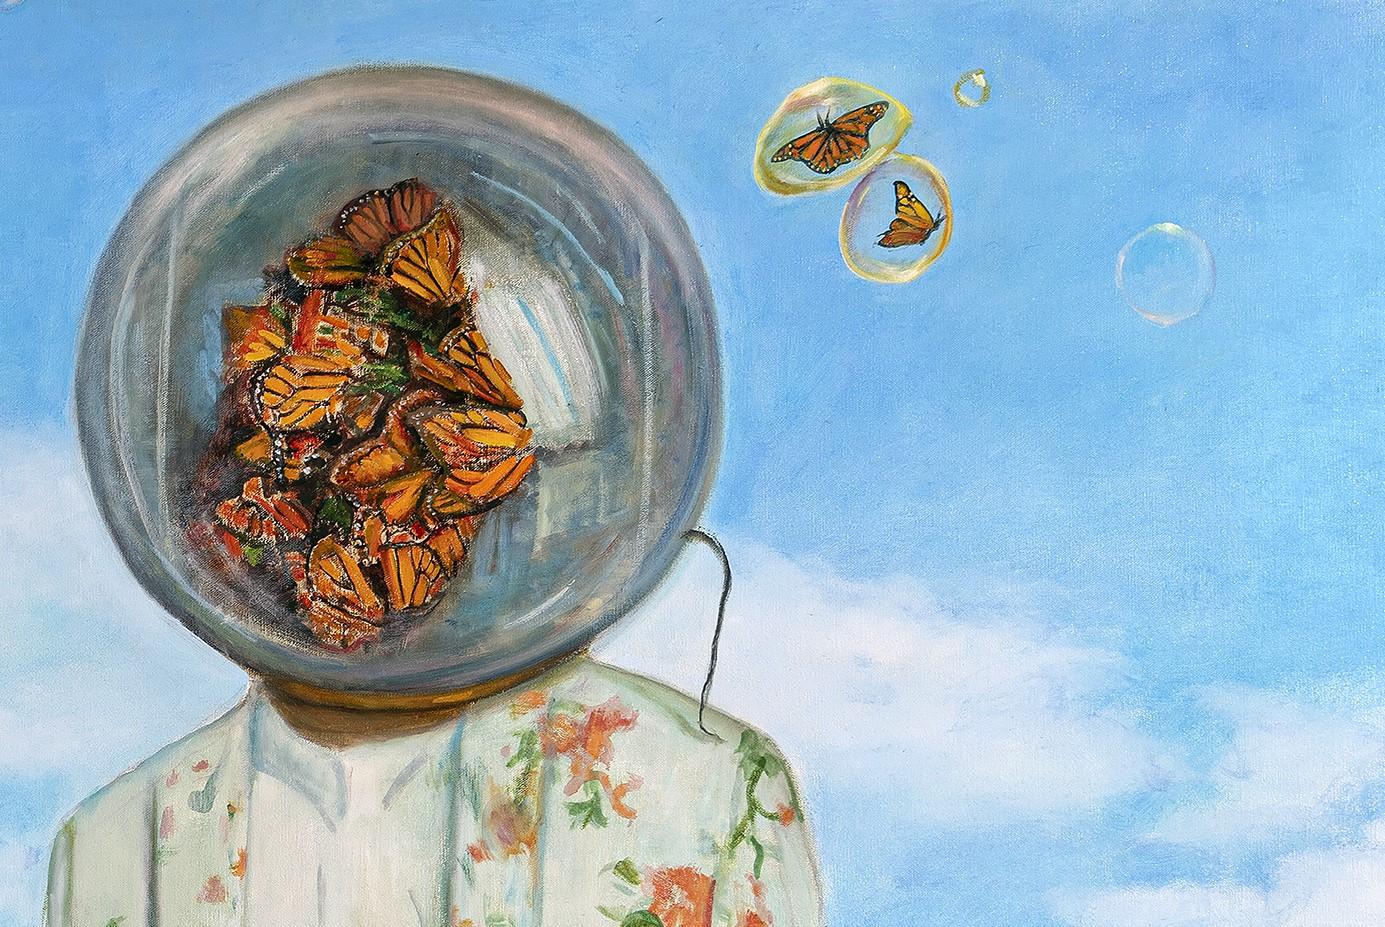 Pollinators - Two Figures in Flower Suits, Surrounded by Butterflies, Bright Sky - Contemporary Painting by Rose Freymuth-Frazier